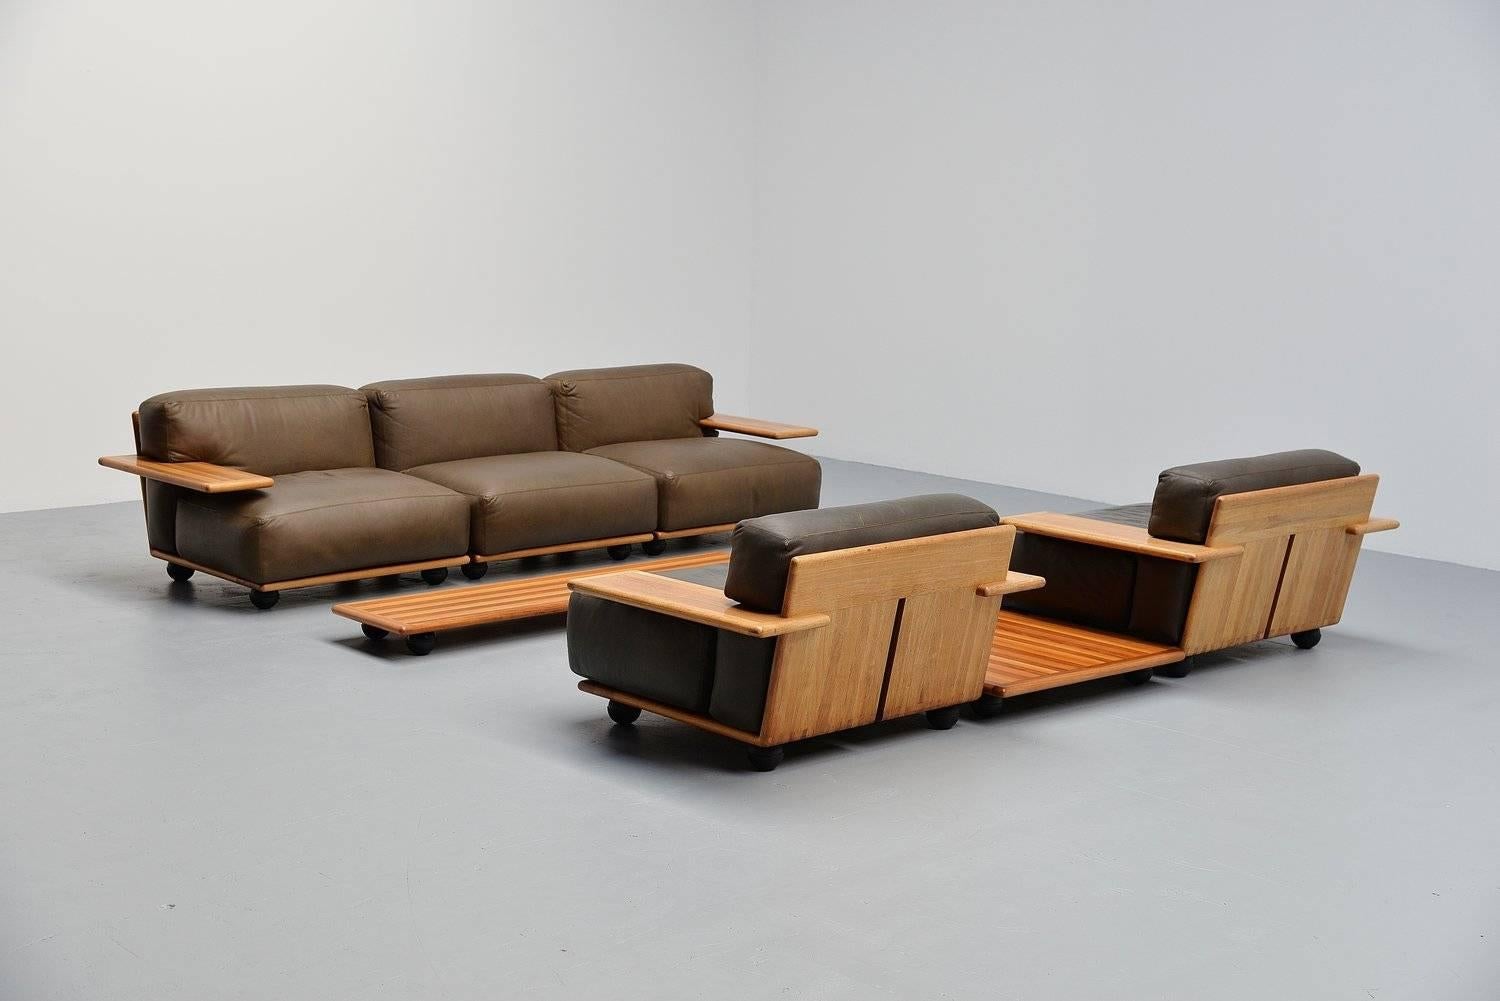 Fantastic complete seating group designed by Mario Bellini for Cassina, Italy 1971. This set was called Pianura and has a solid walnut wooden frame, or top. The cushions are made of dark olive green leather and has a very nice patina from age and